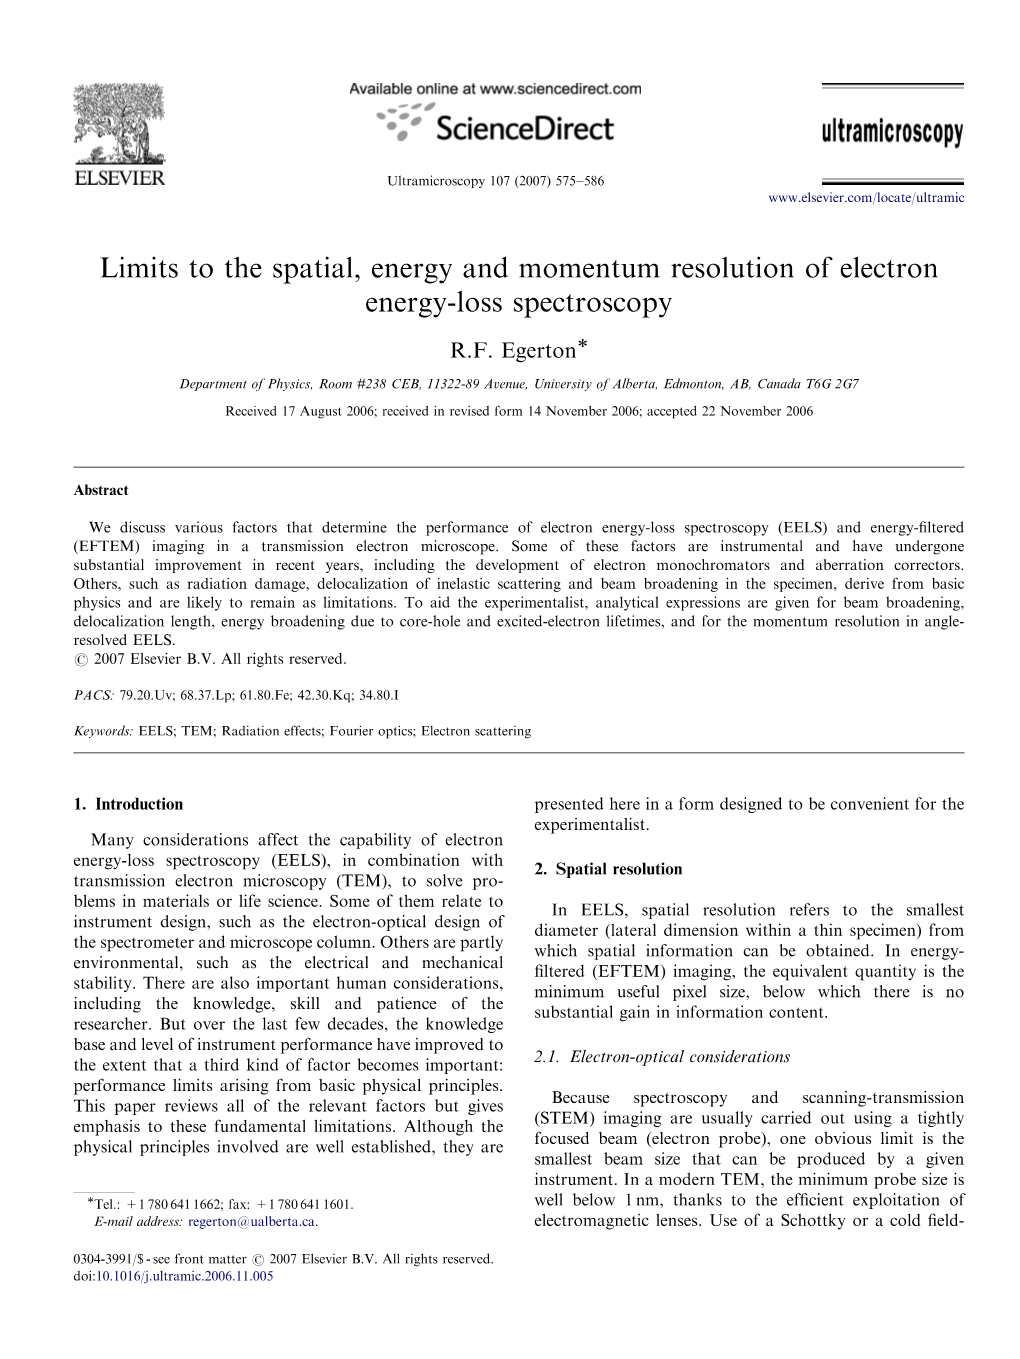 Limits to the Spatial, Energy and Momentum Resolution of Electron Energy-Loss Spectroscopy